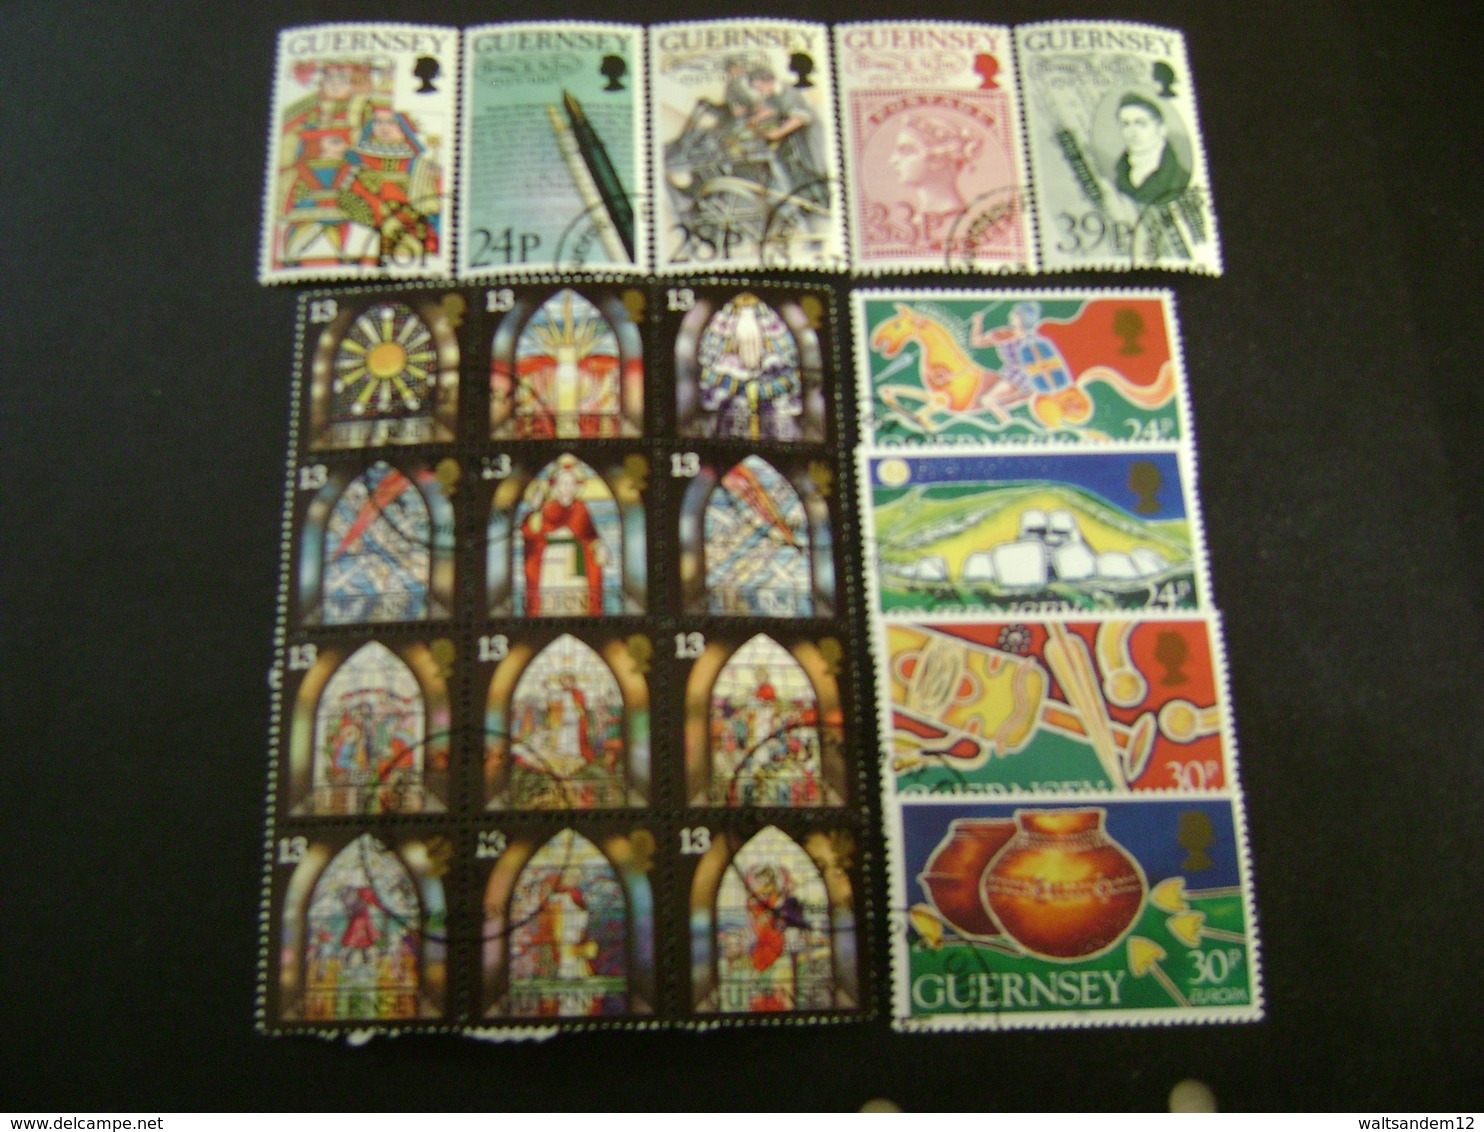 Guernsey 1993-1994 Commemorative/special Issues (SG 606-615, 617-643, 645-649, 651-662) 3 Images - Used - Guernsey